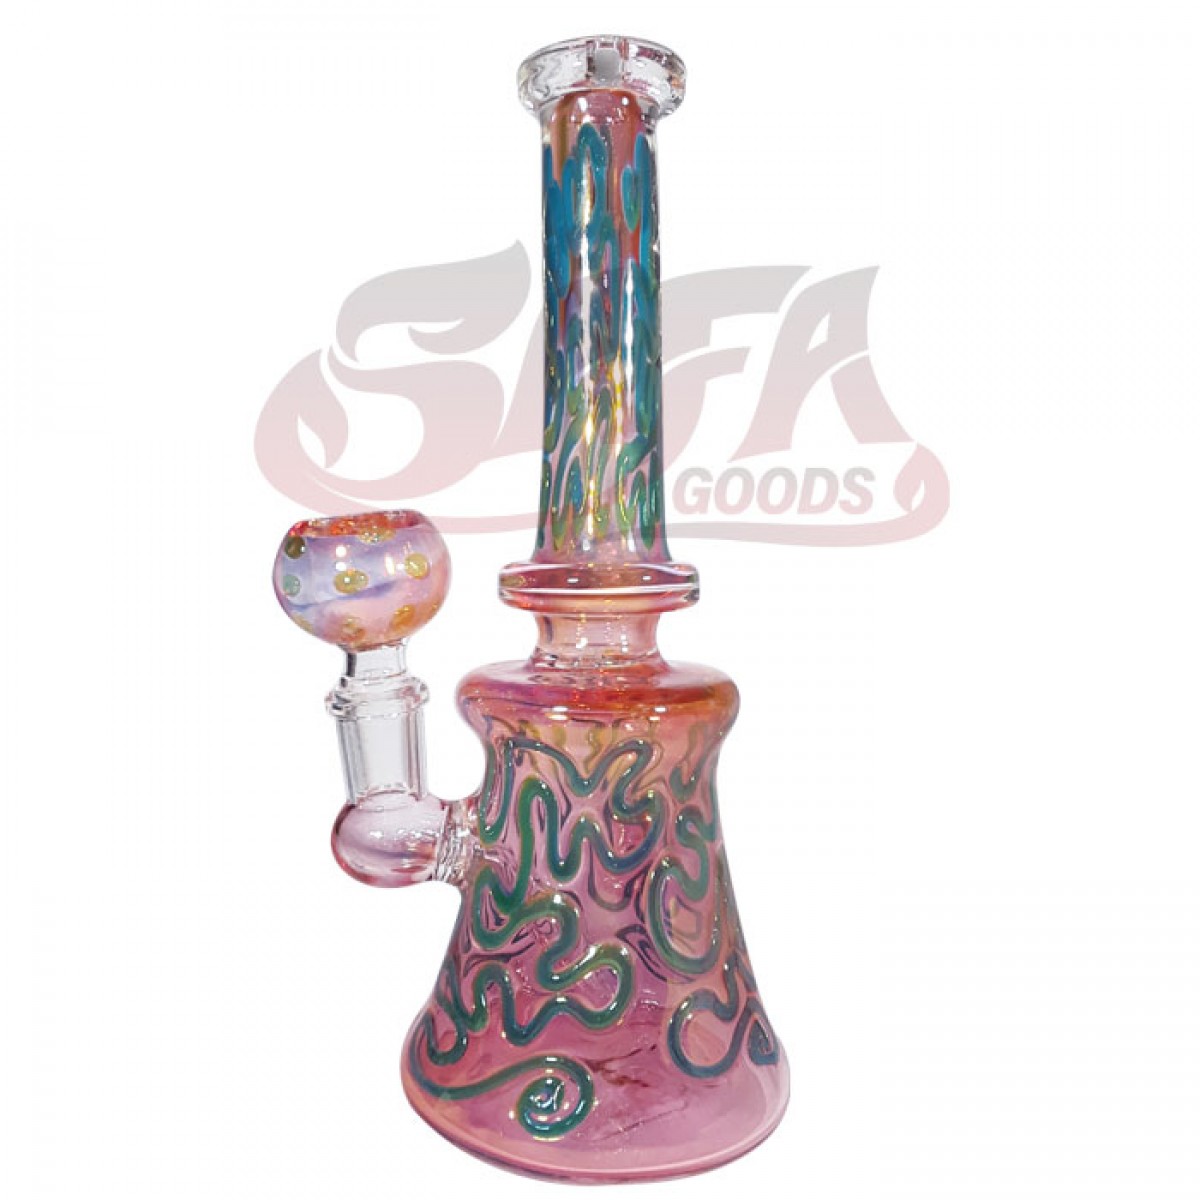 8 Inch Banger Hanger Water Pipes - Fume and Linework